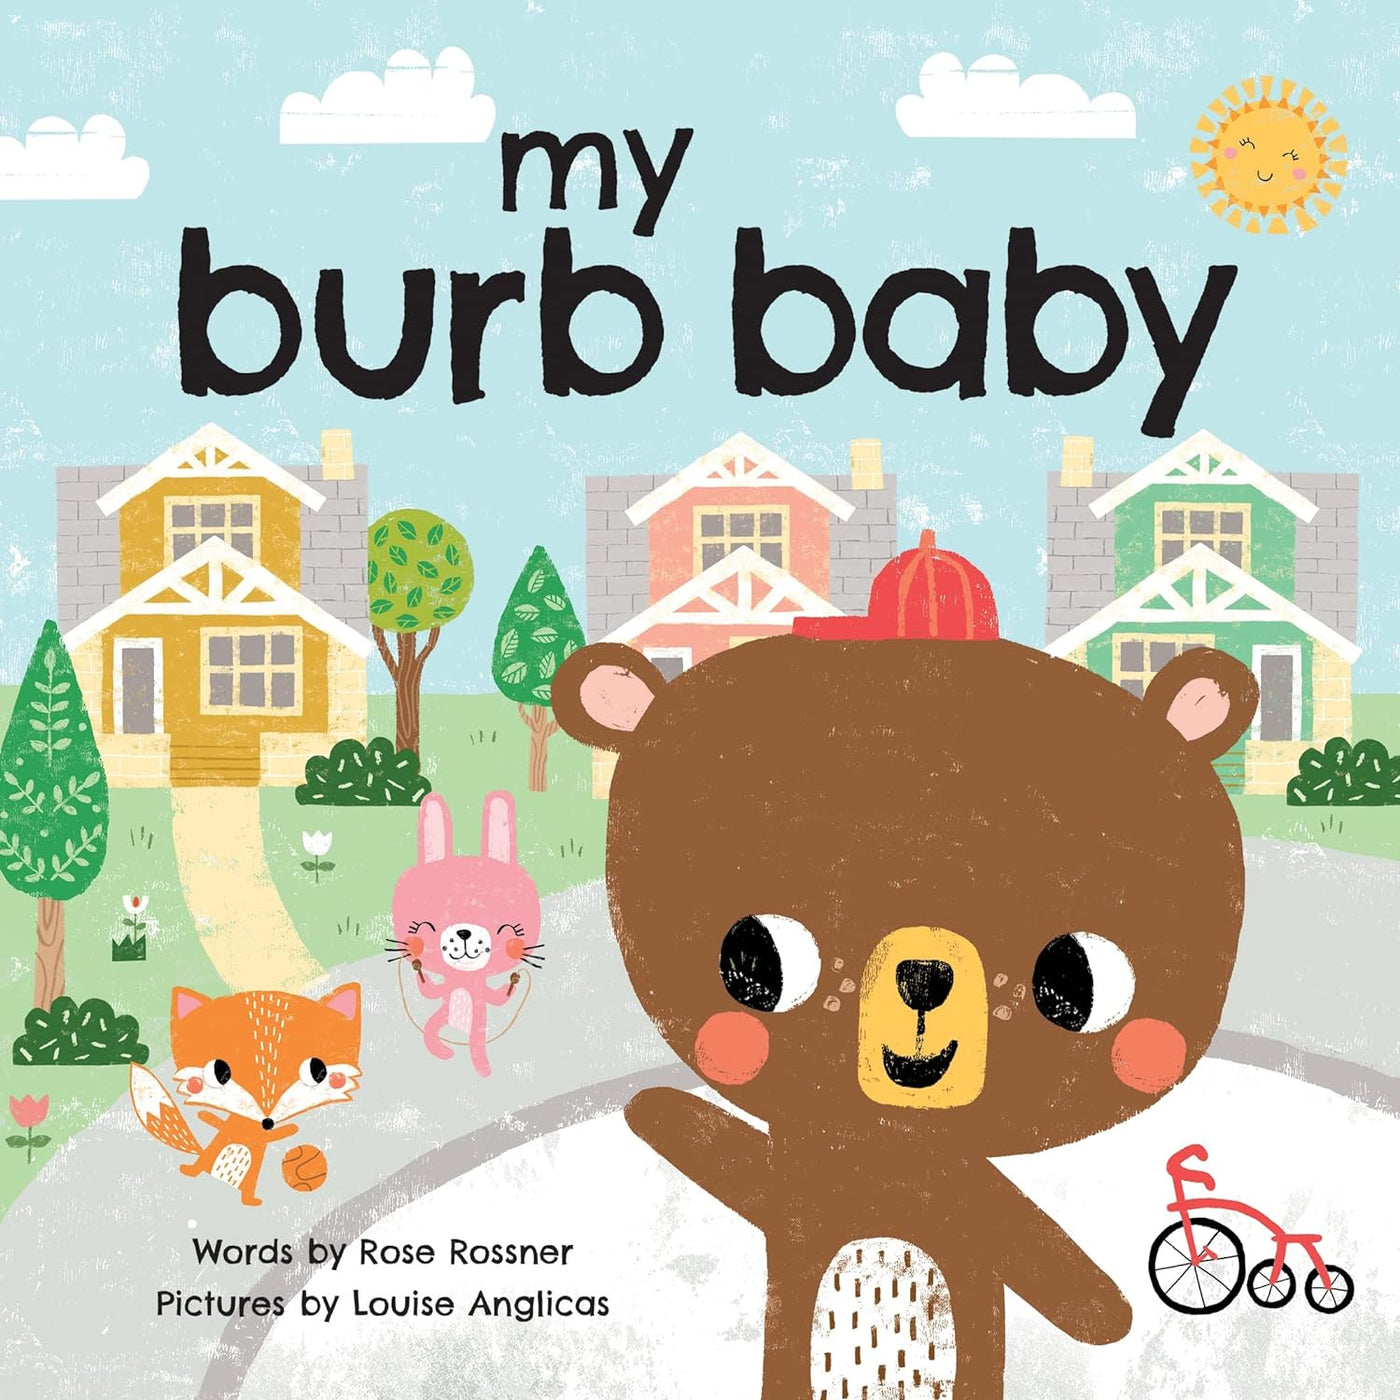 My Burb Baby: Ride Along in this Sweet, Hometown Adventure